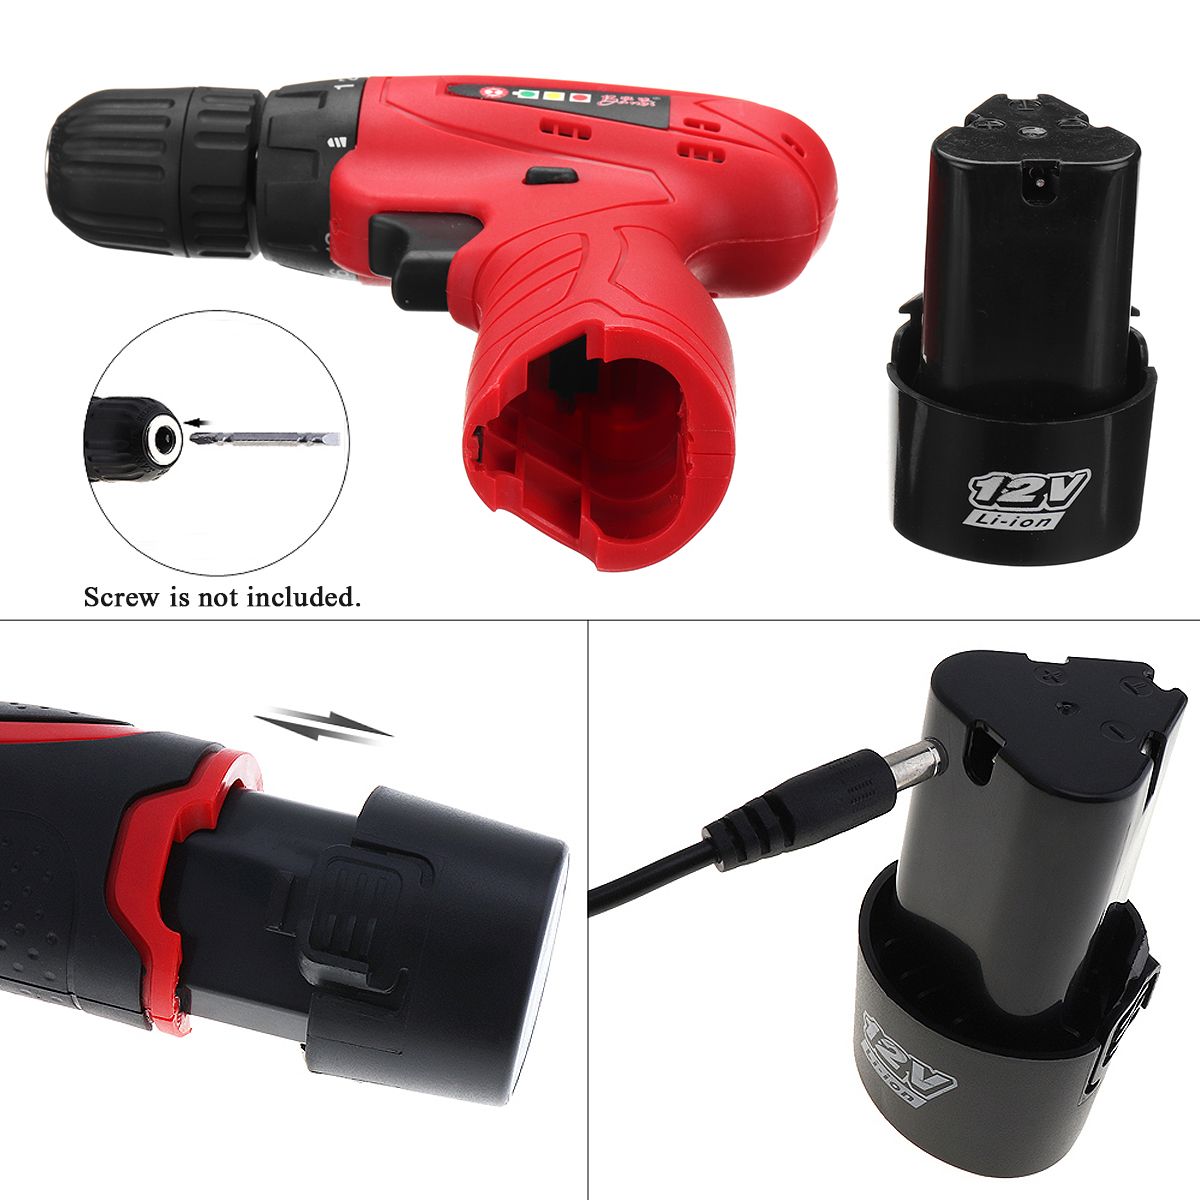 DC12V-Cordless-Electric-Screwdriver-Power-Screw-Driver-Drill-Tools-1-Battery-1-Charger-EU-Plug-1300205